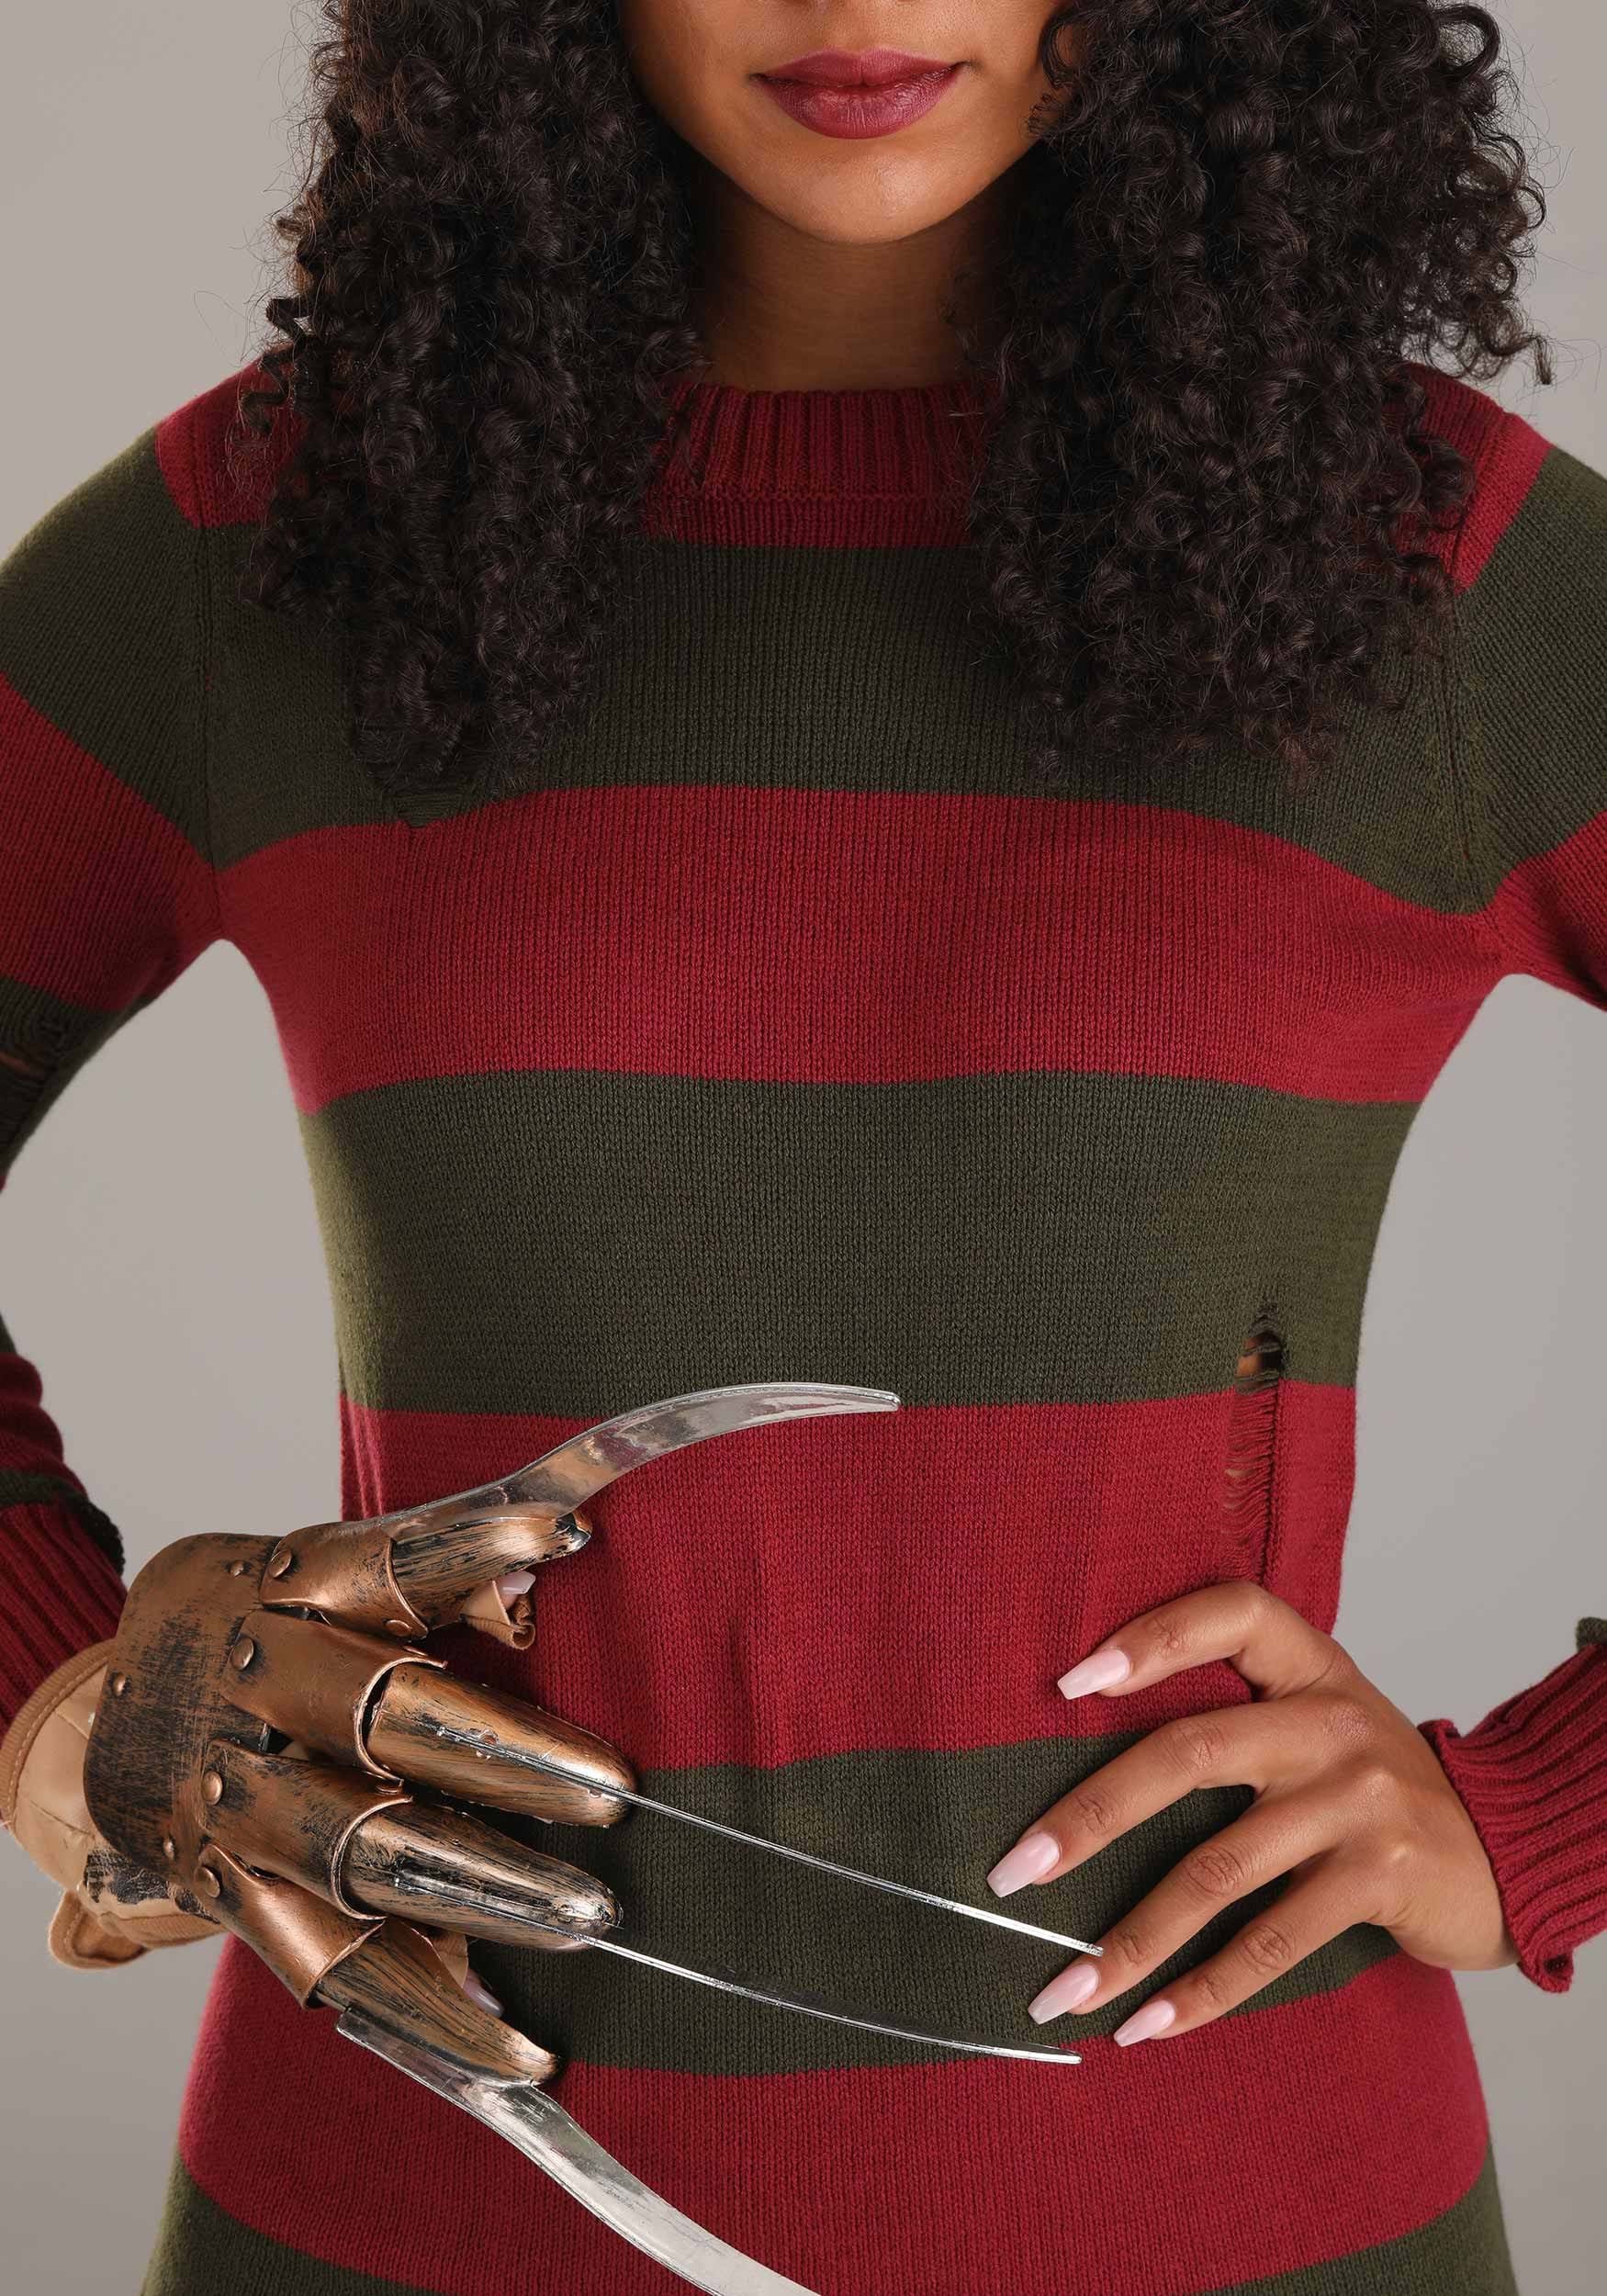 Freddy Krueger Plus Size Costume Dress For Adults , Horror Movie Costumes